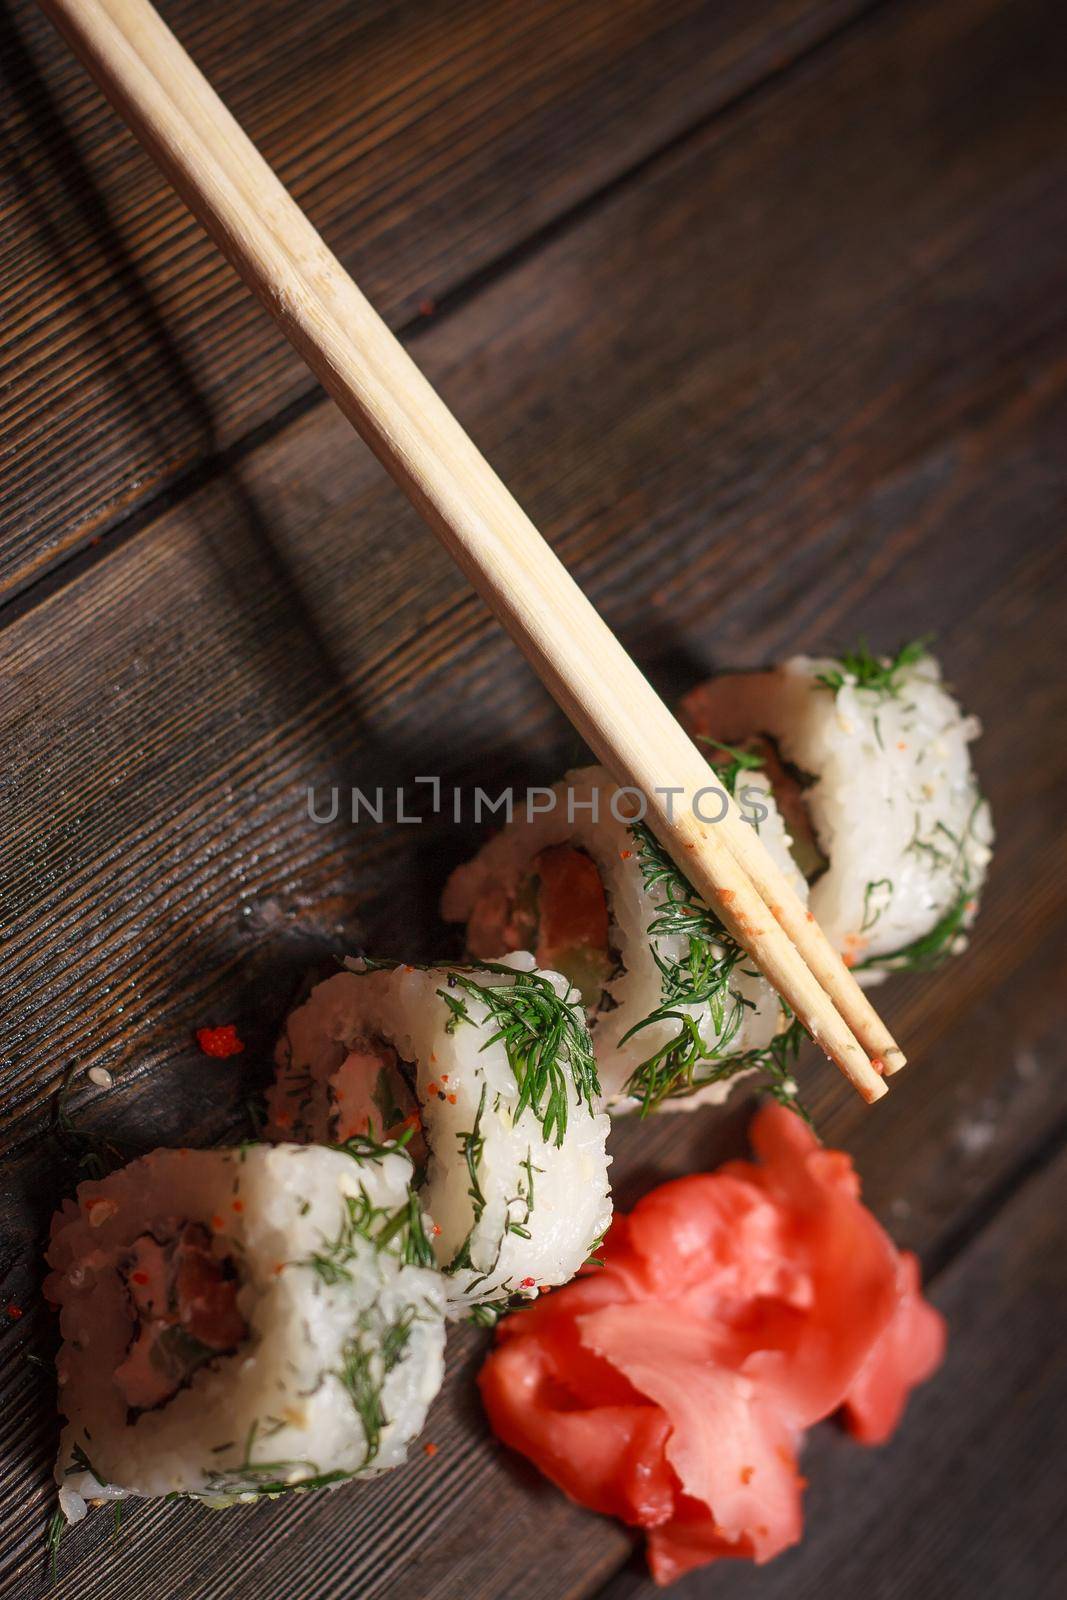 rolls red ginger food delivery japanese restaurant gourmet wooden table. High quality photo